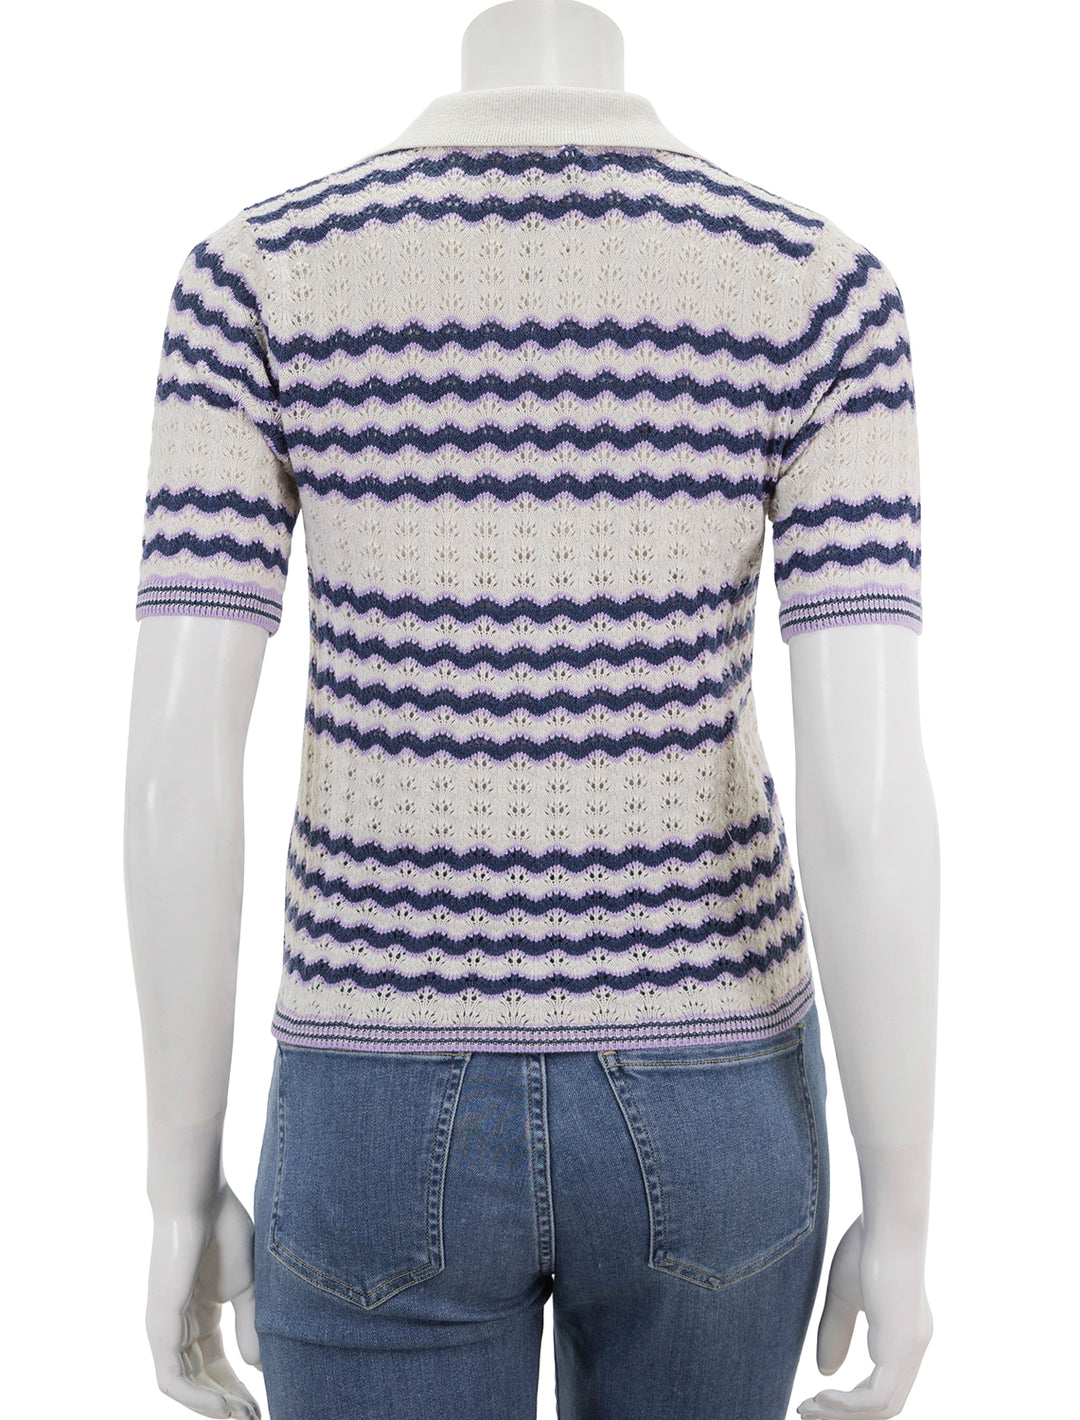 Back view of Marine Layer's spencer polo sweater in cool wave.